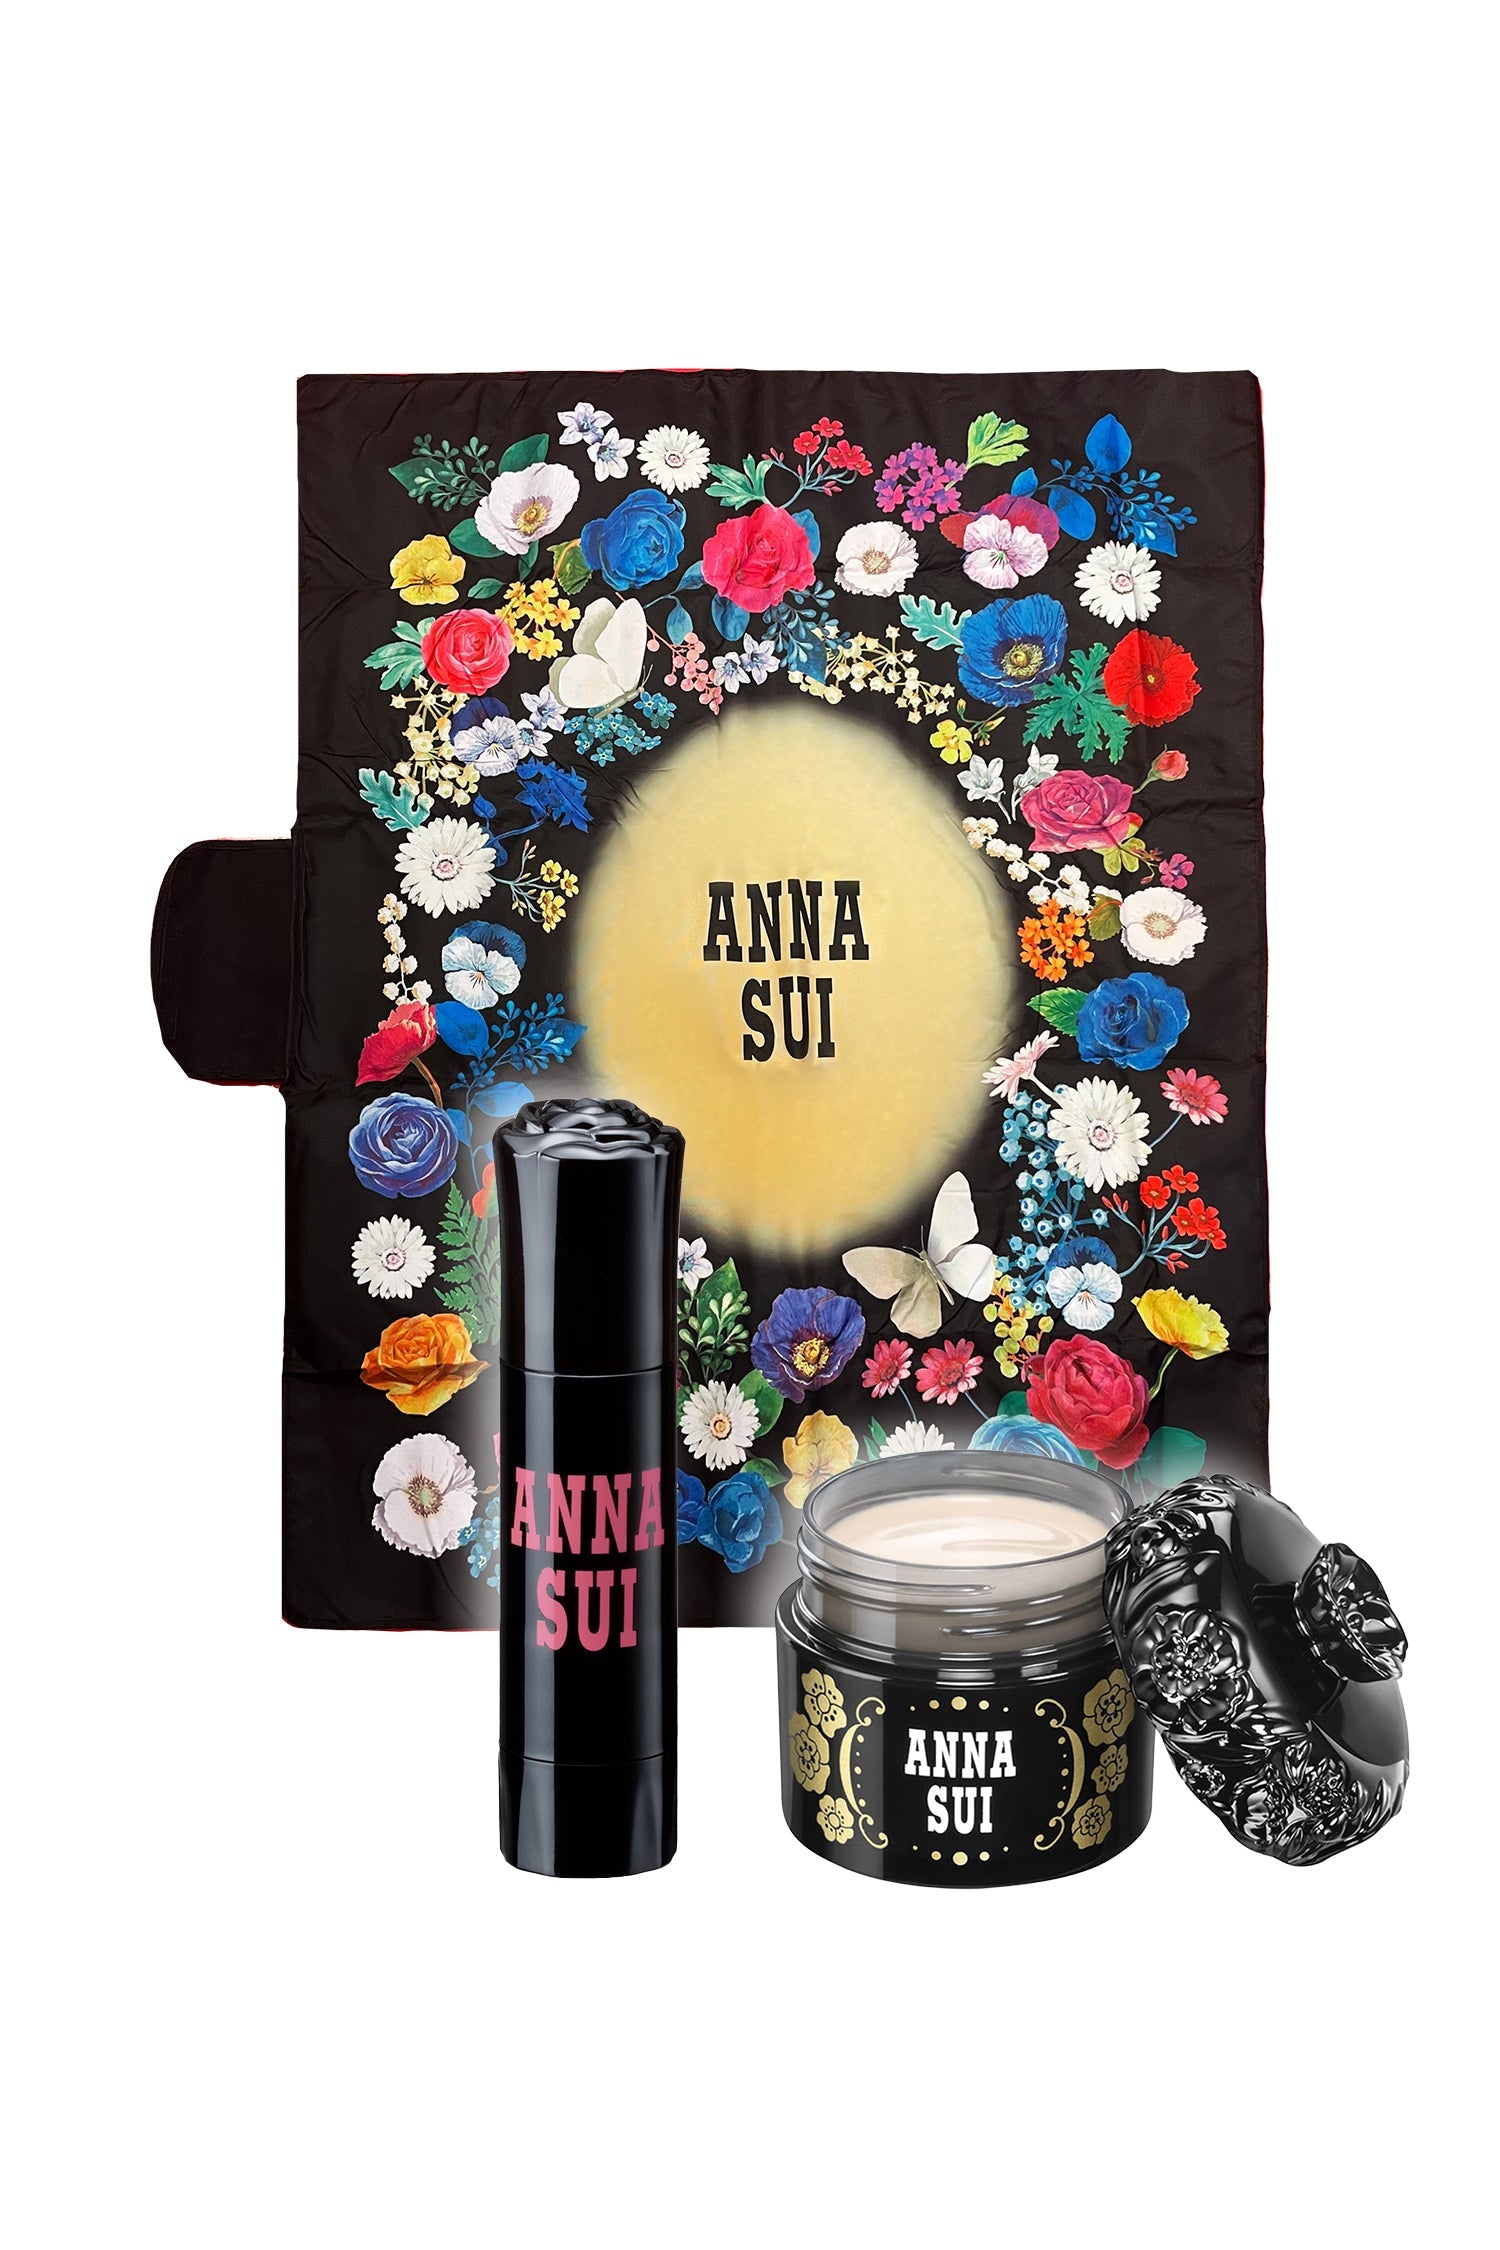 ROSE cheek & primer set, the Anna Sui on cylinder case with a rose on top plus a black round case